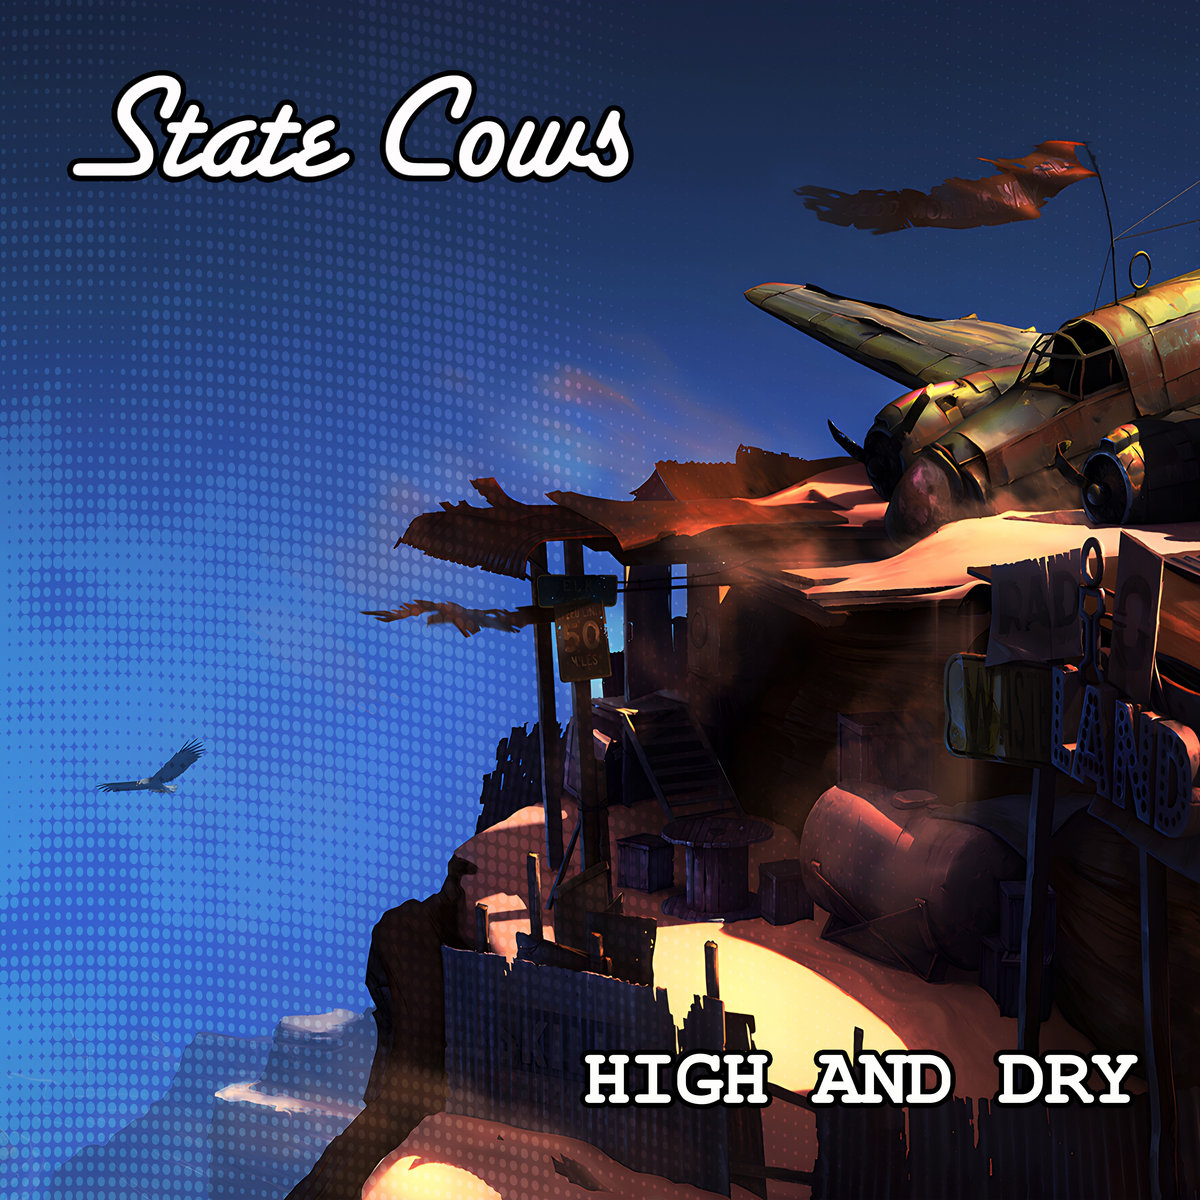 STATE COWS「High and Dry」